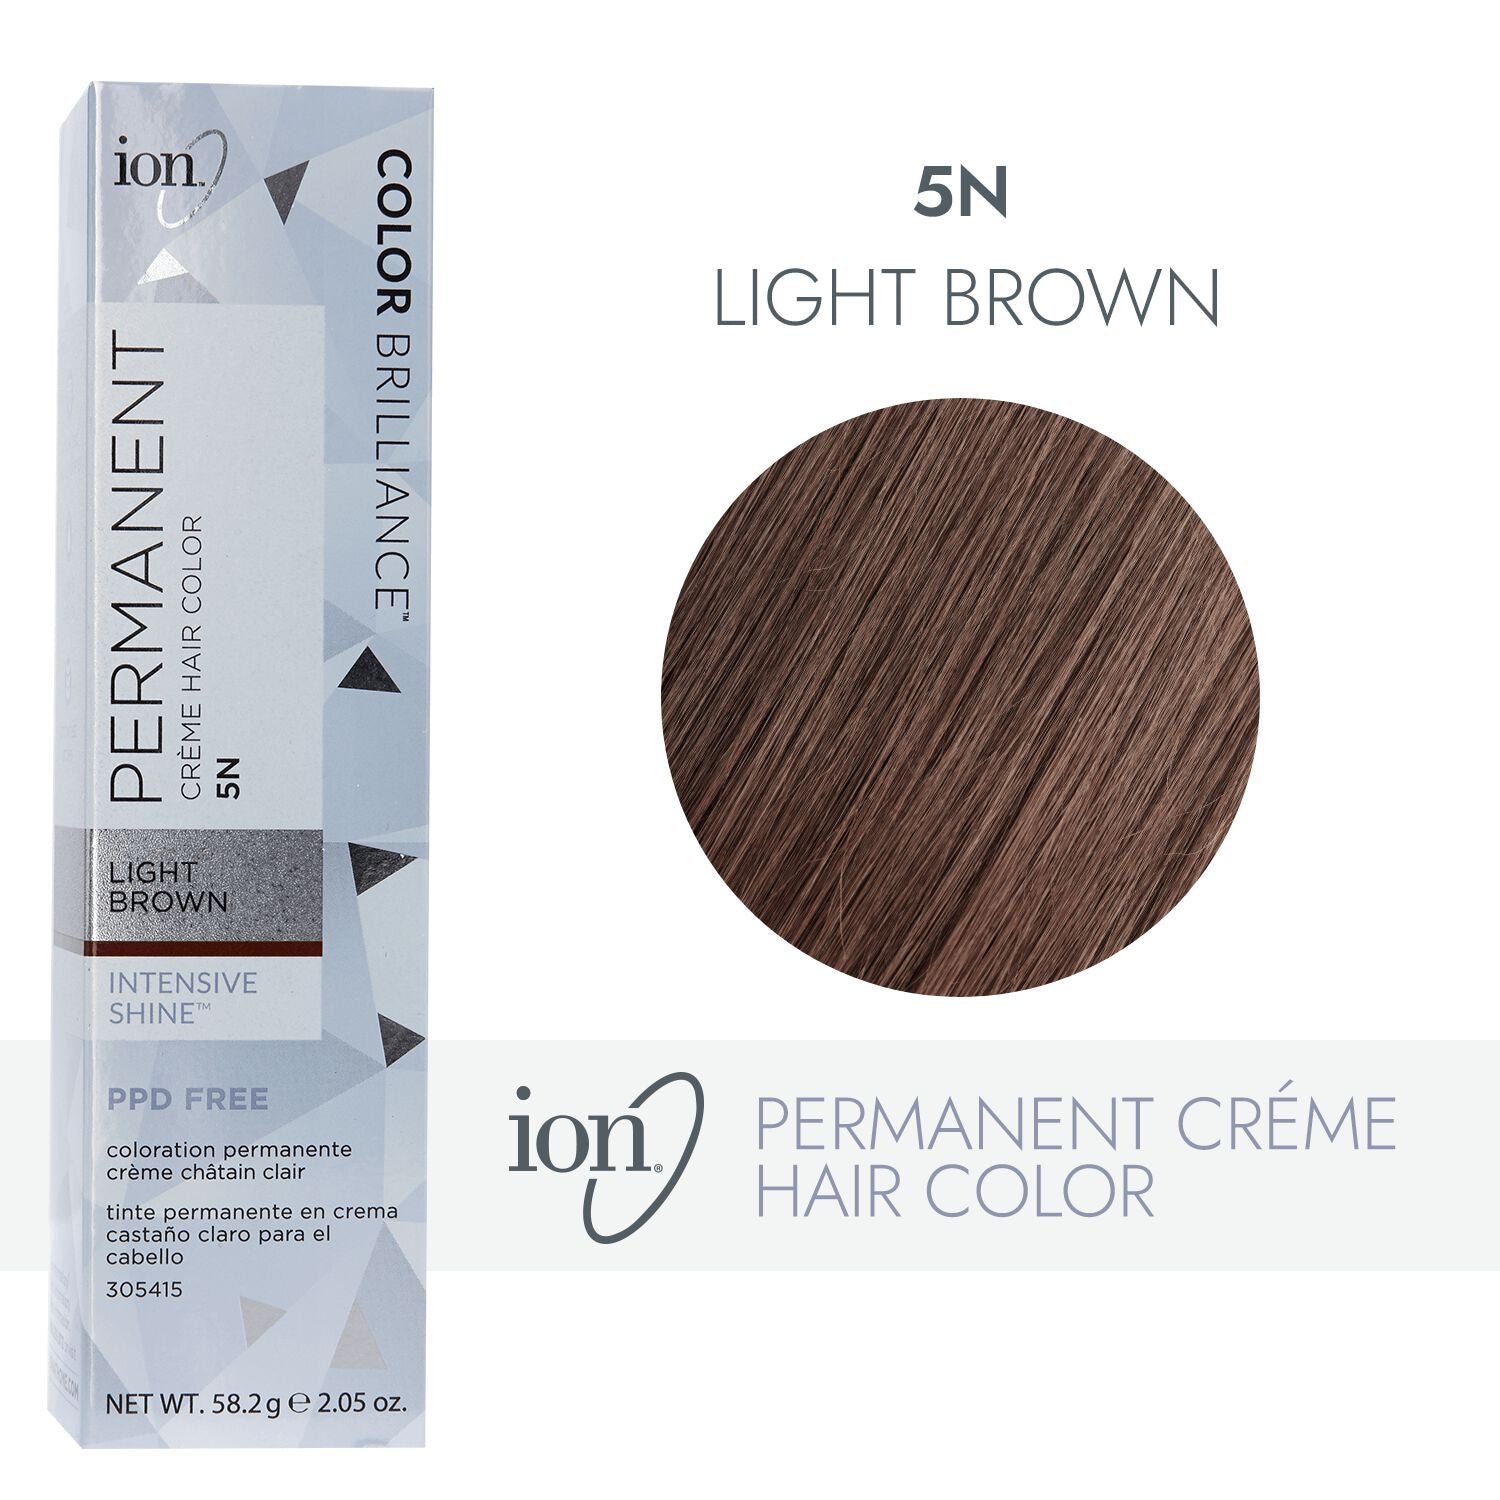 ion 5N Light Brown Permanent Creme Hair Color